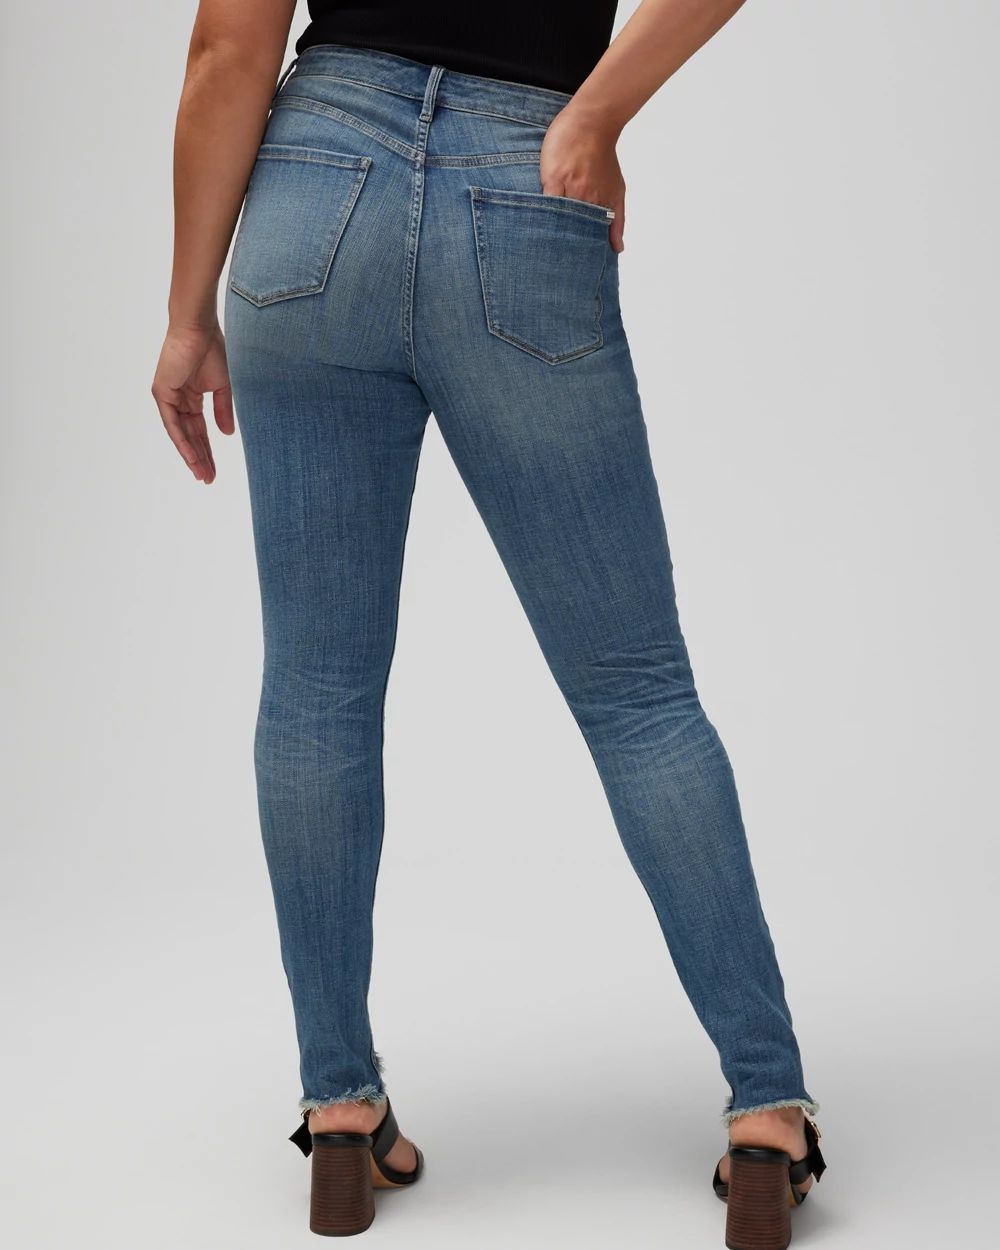 Curvy XHR Extra High-Rise Everyday Soft Denim  Skinny Ankle Jeans click to view larger image.